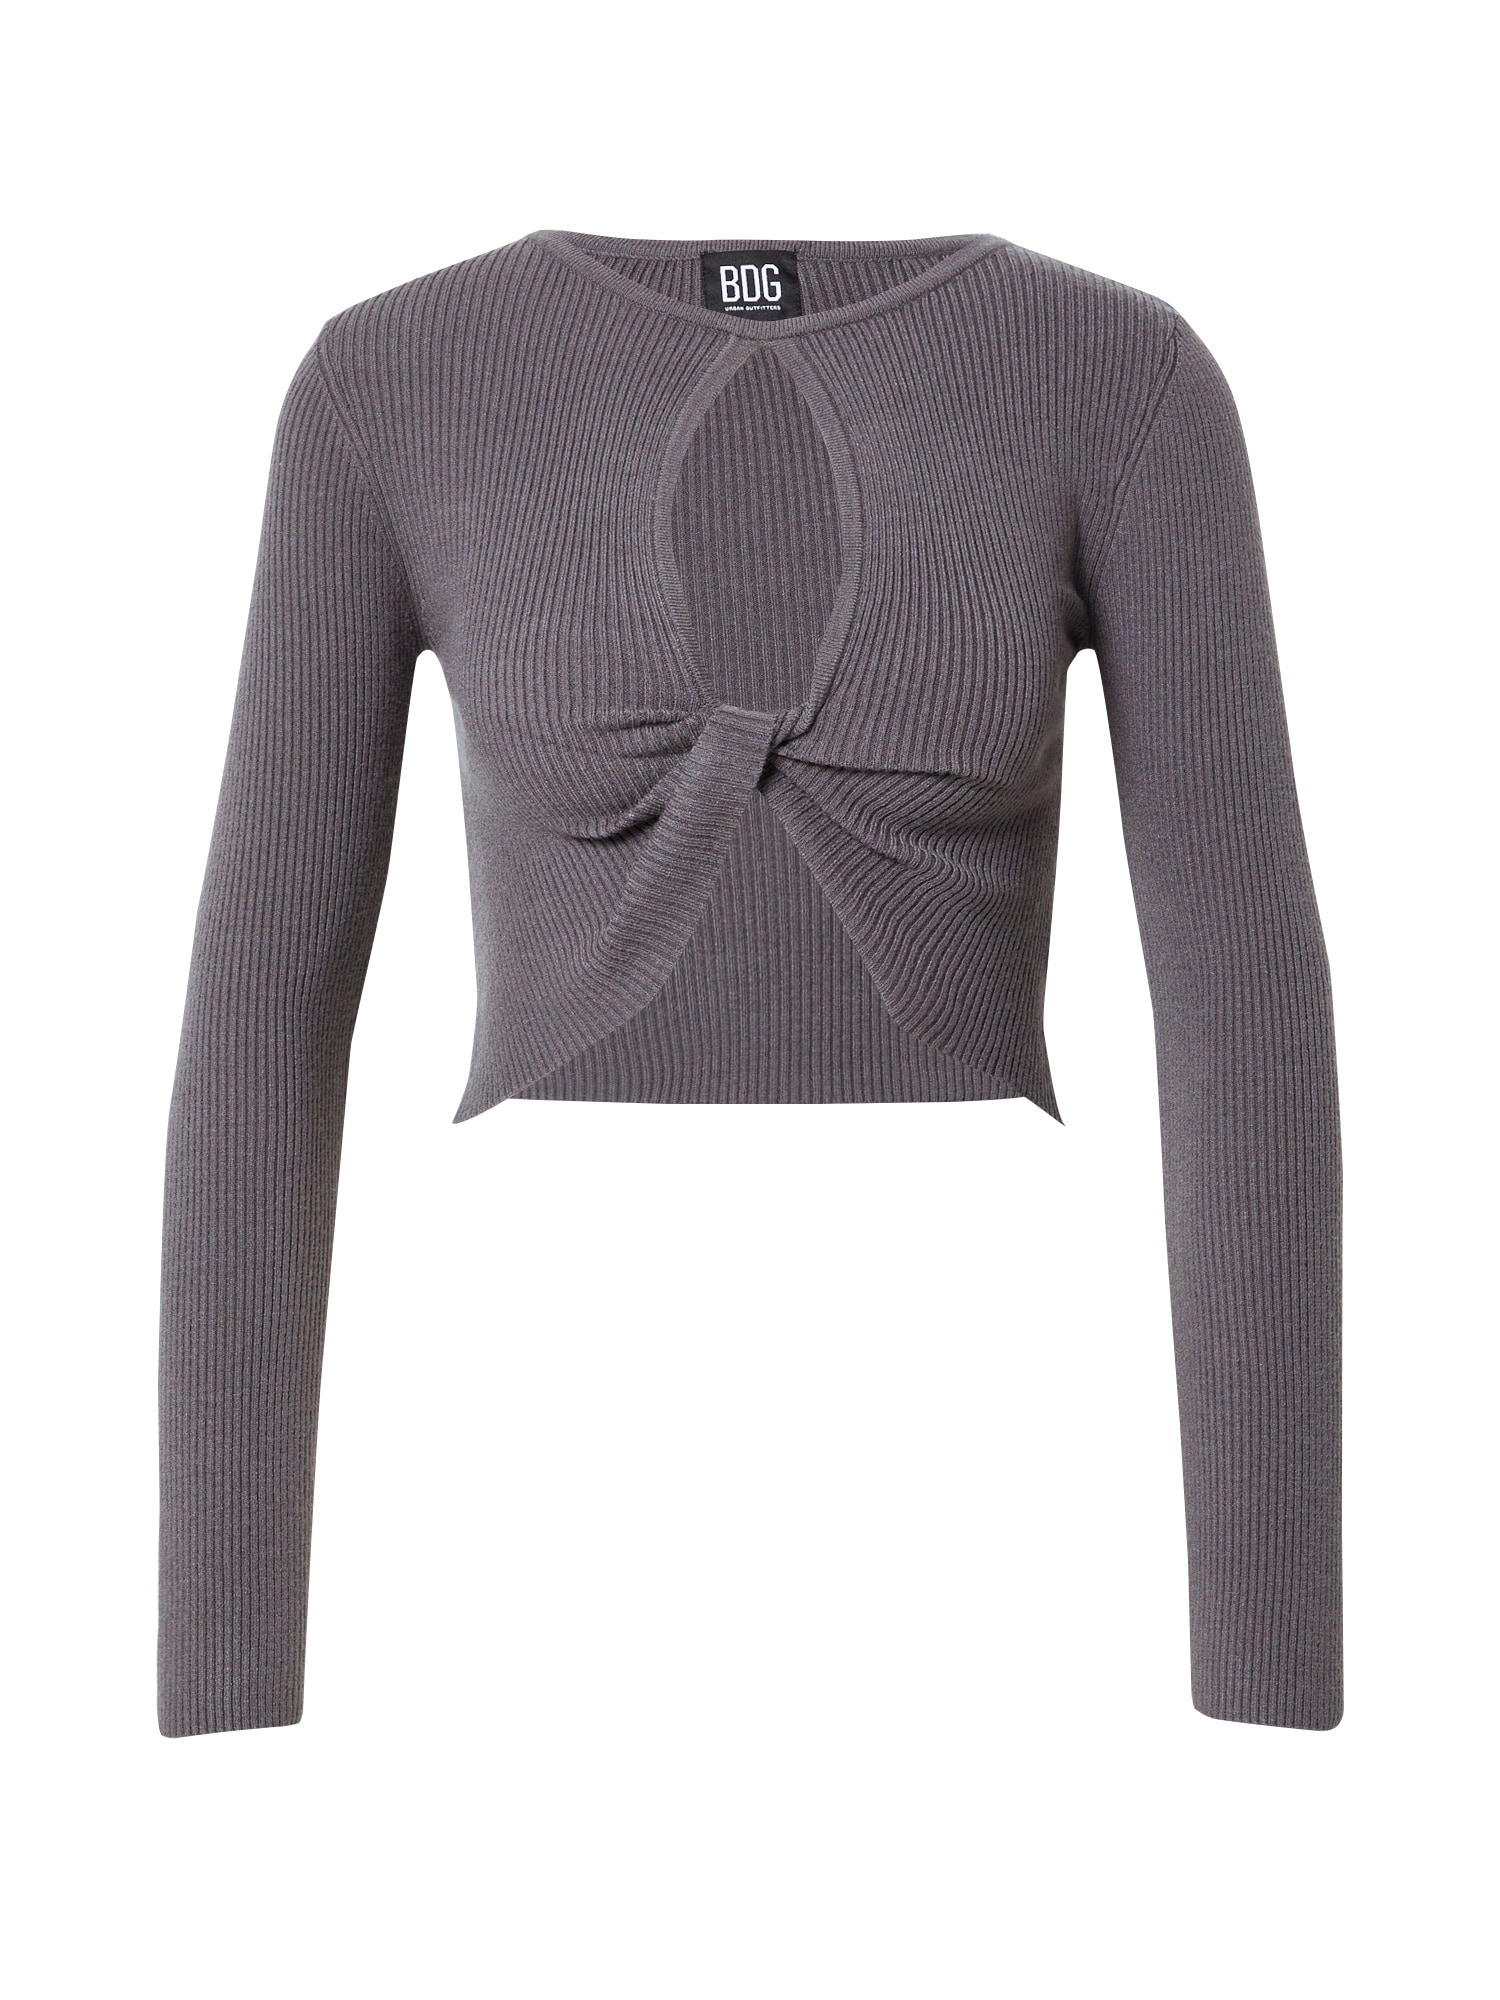 Pullover  'KENDRA' von BDG Urban Outfitters